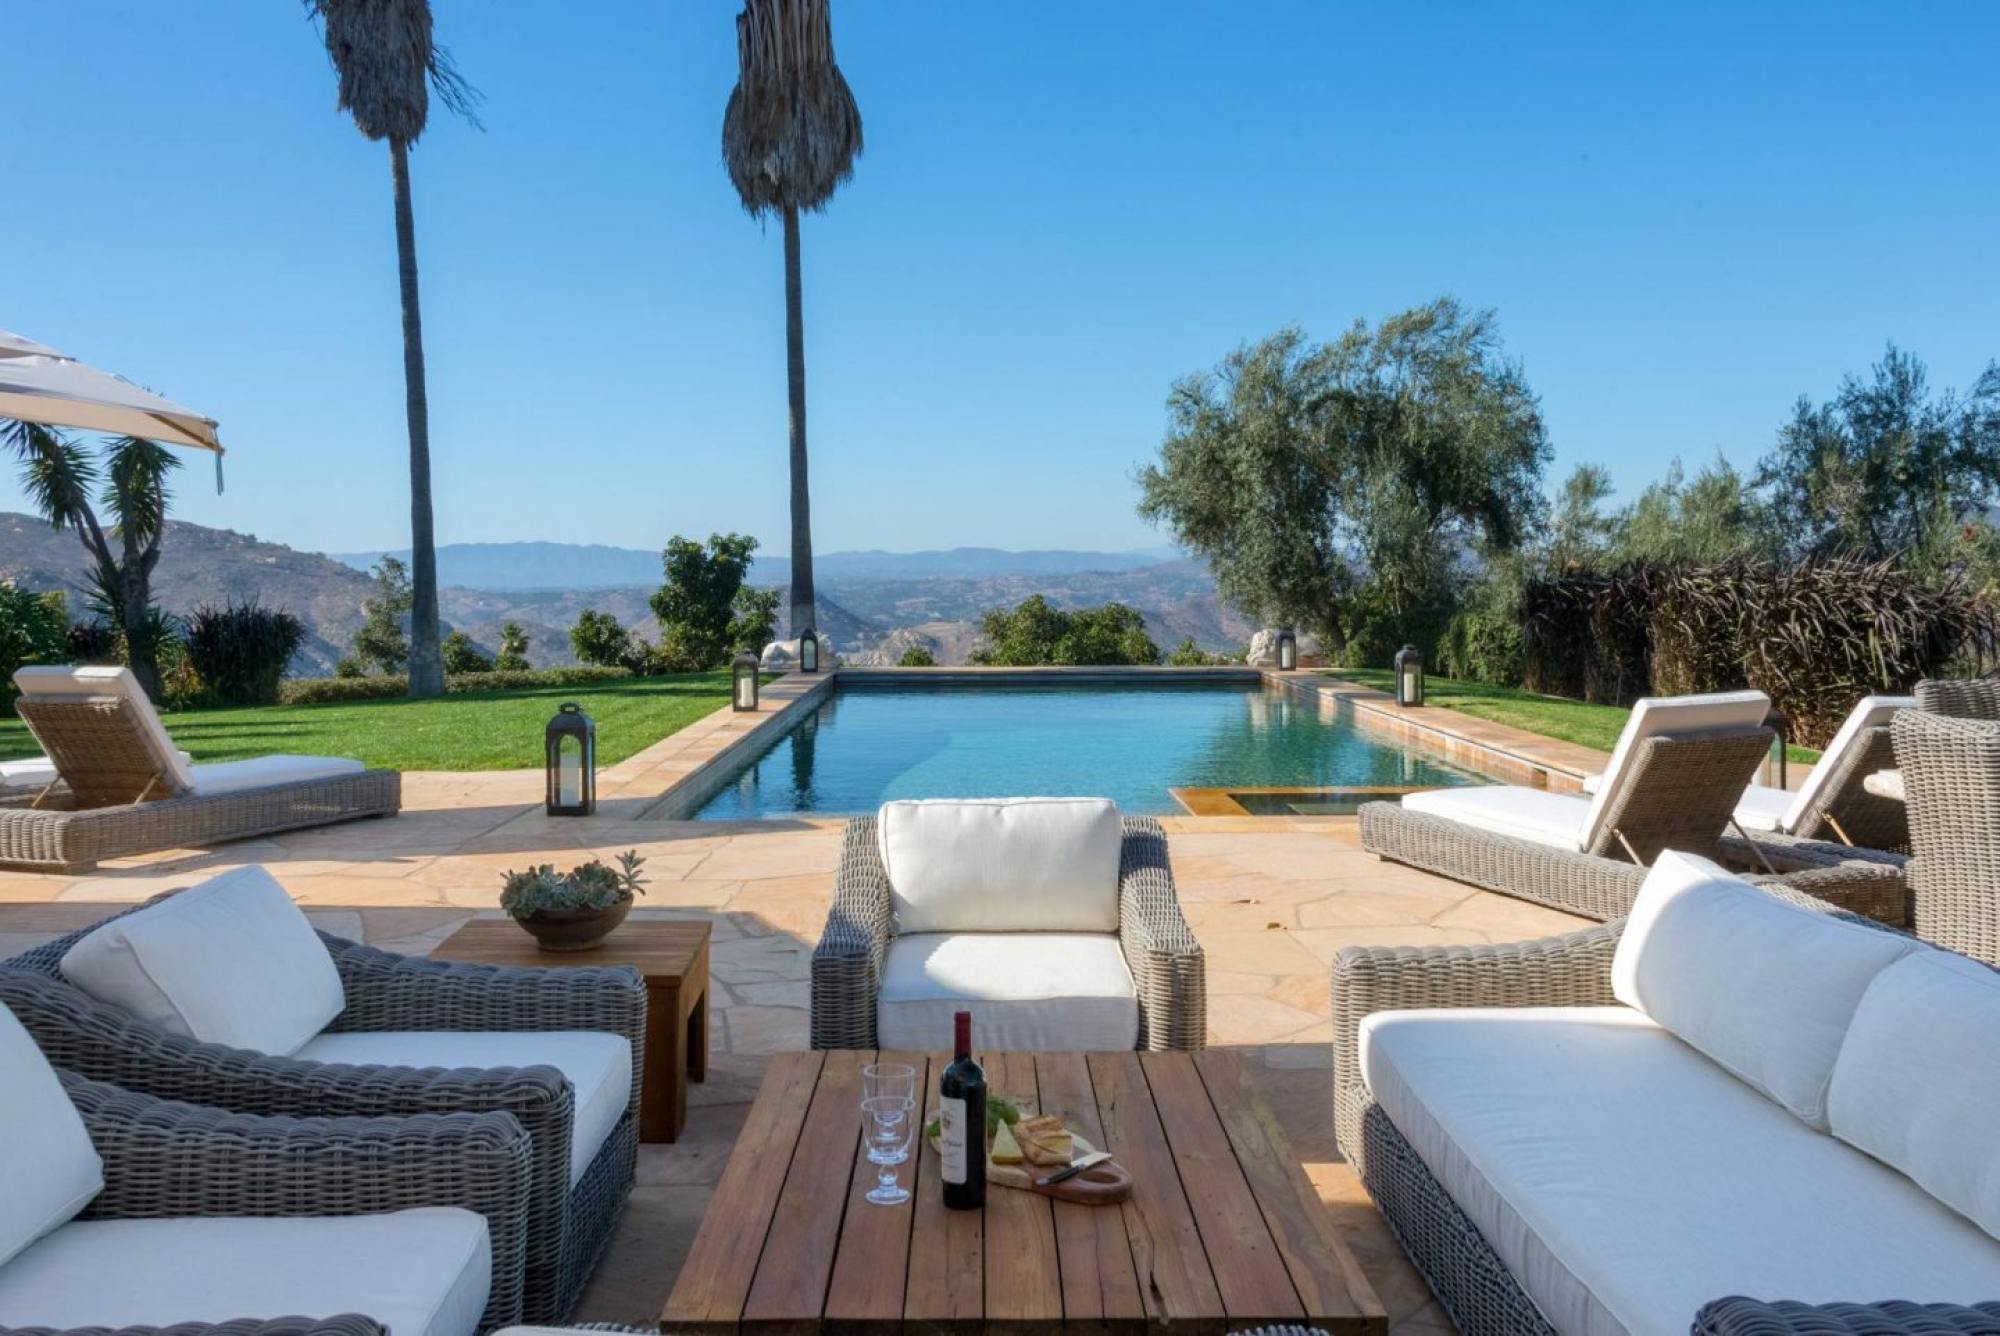 The poolside lounging space at Sandra Bullock’s compound in San Diego. Photo: ZenHouse Collective